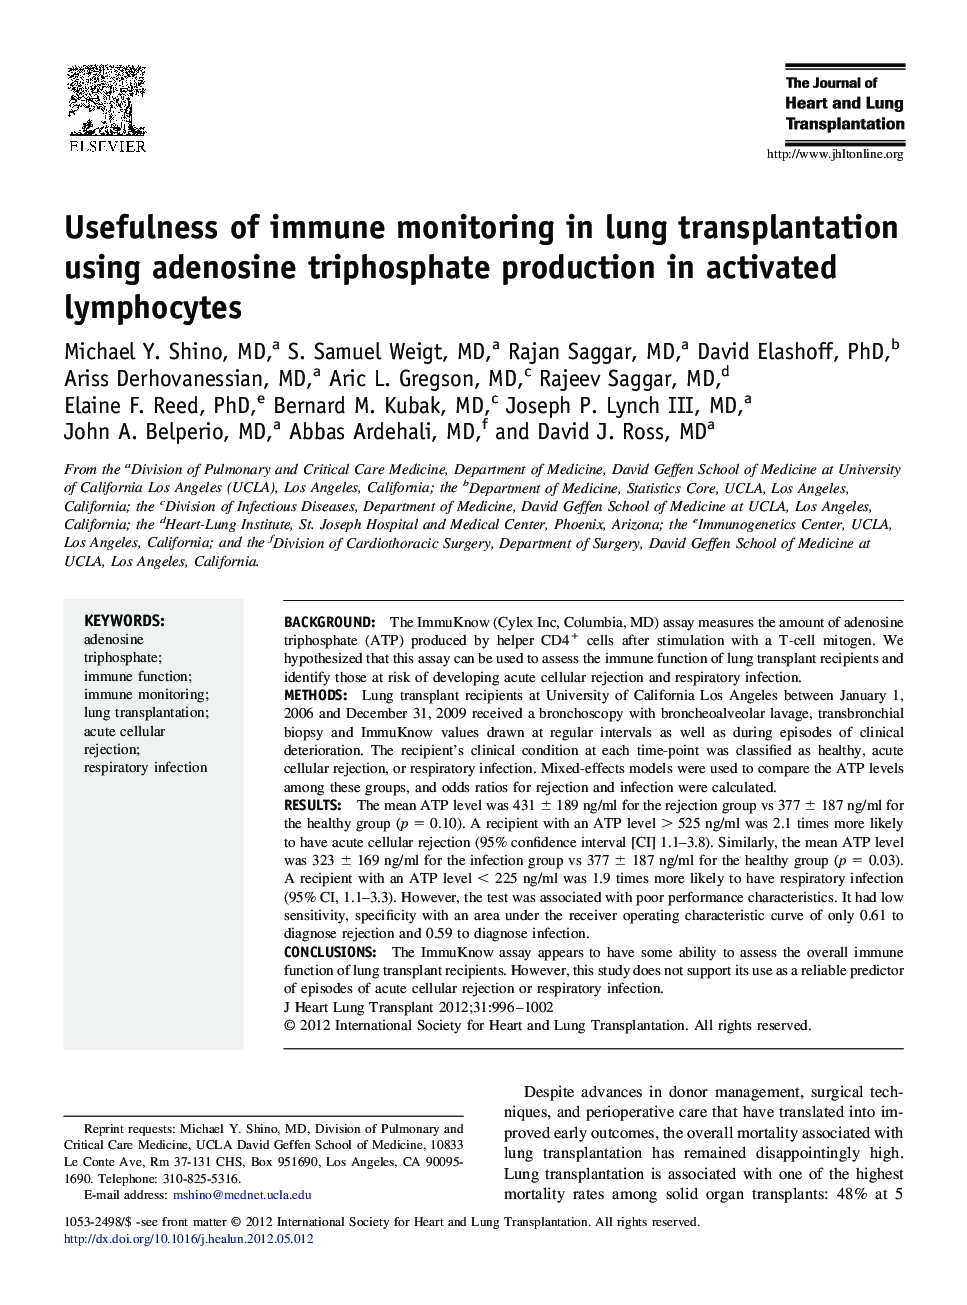 Usefulness of immune monitoring in lung transplantation using adenosine triphosphate production in activated lymphocytes